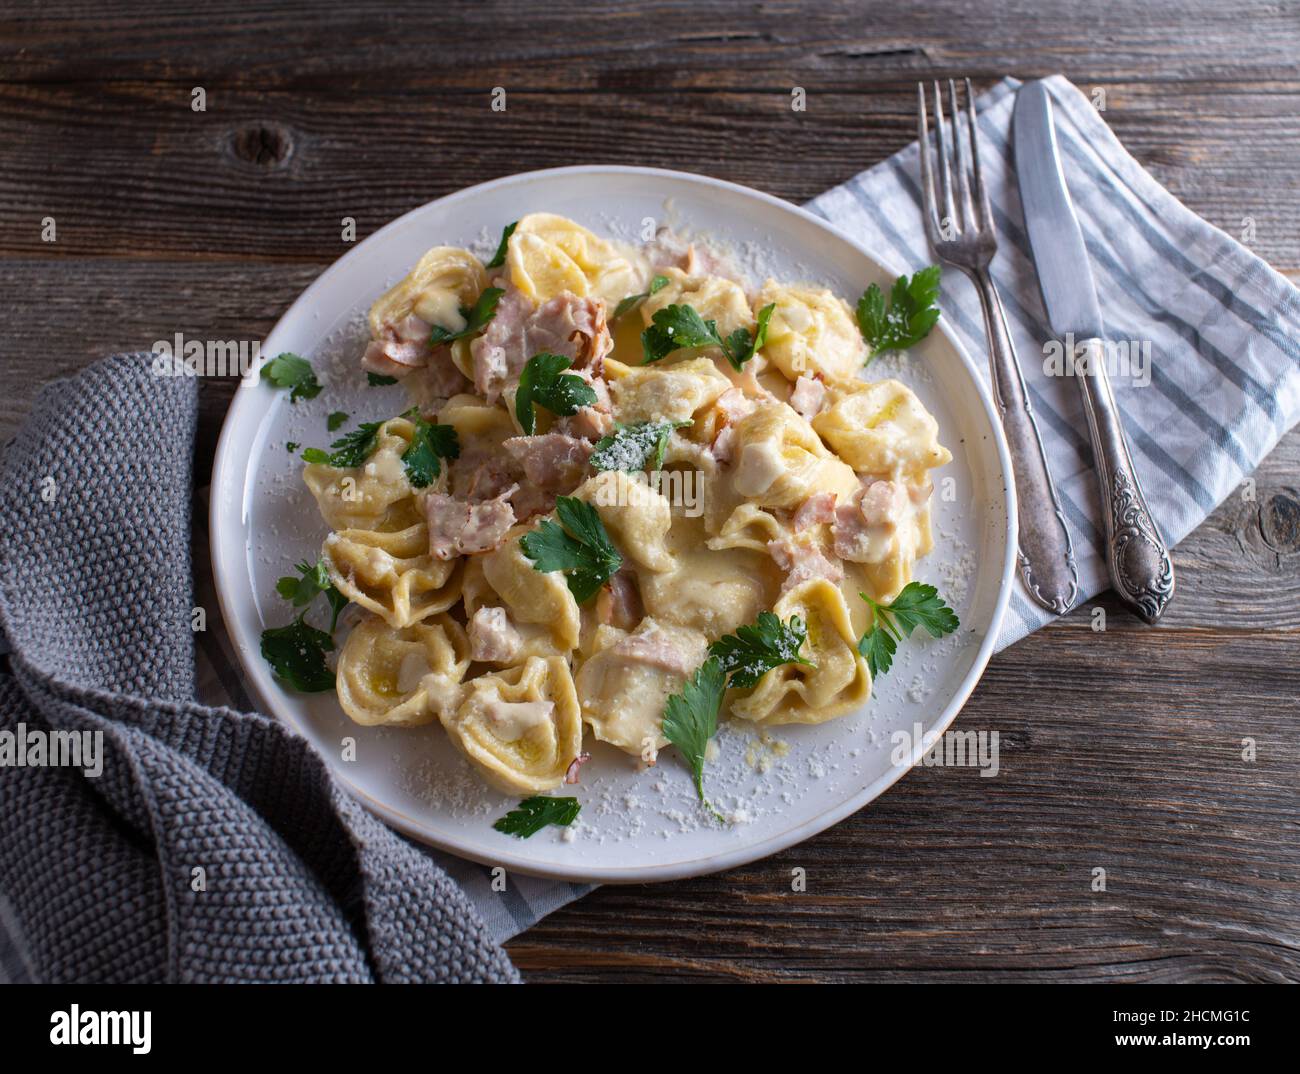 Tortellini alla panna. Traditional fresh cooked italian pasta dish. Served on a white plate isolated on wooden table background Stock Photo